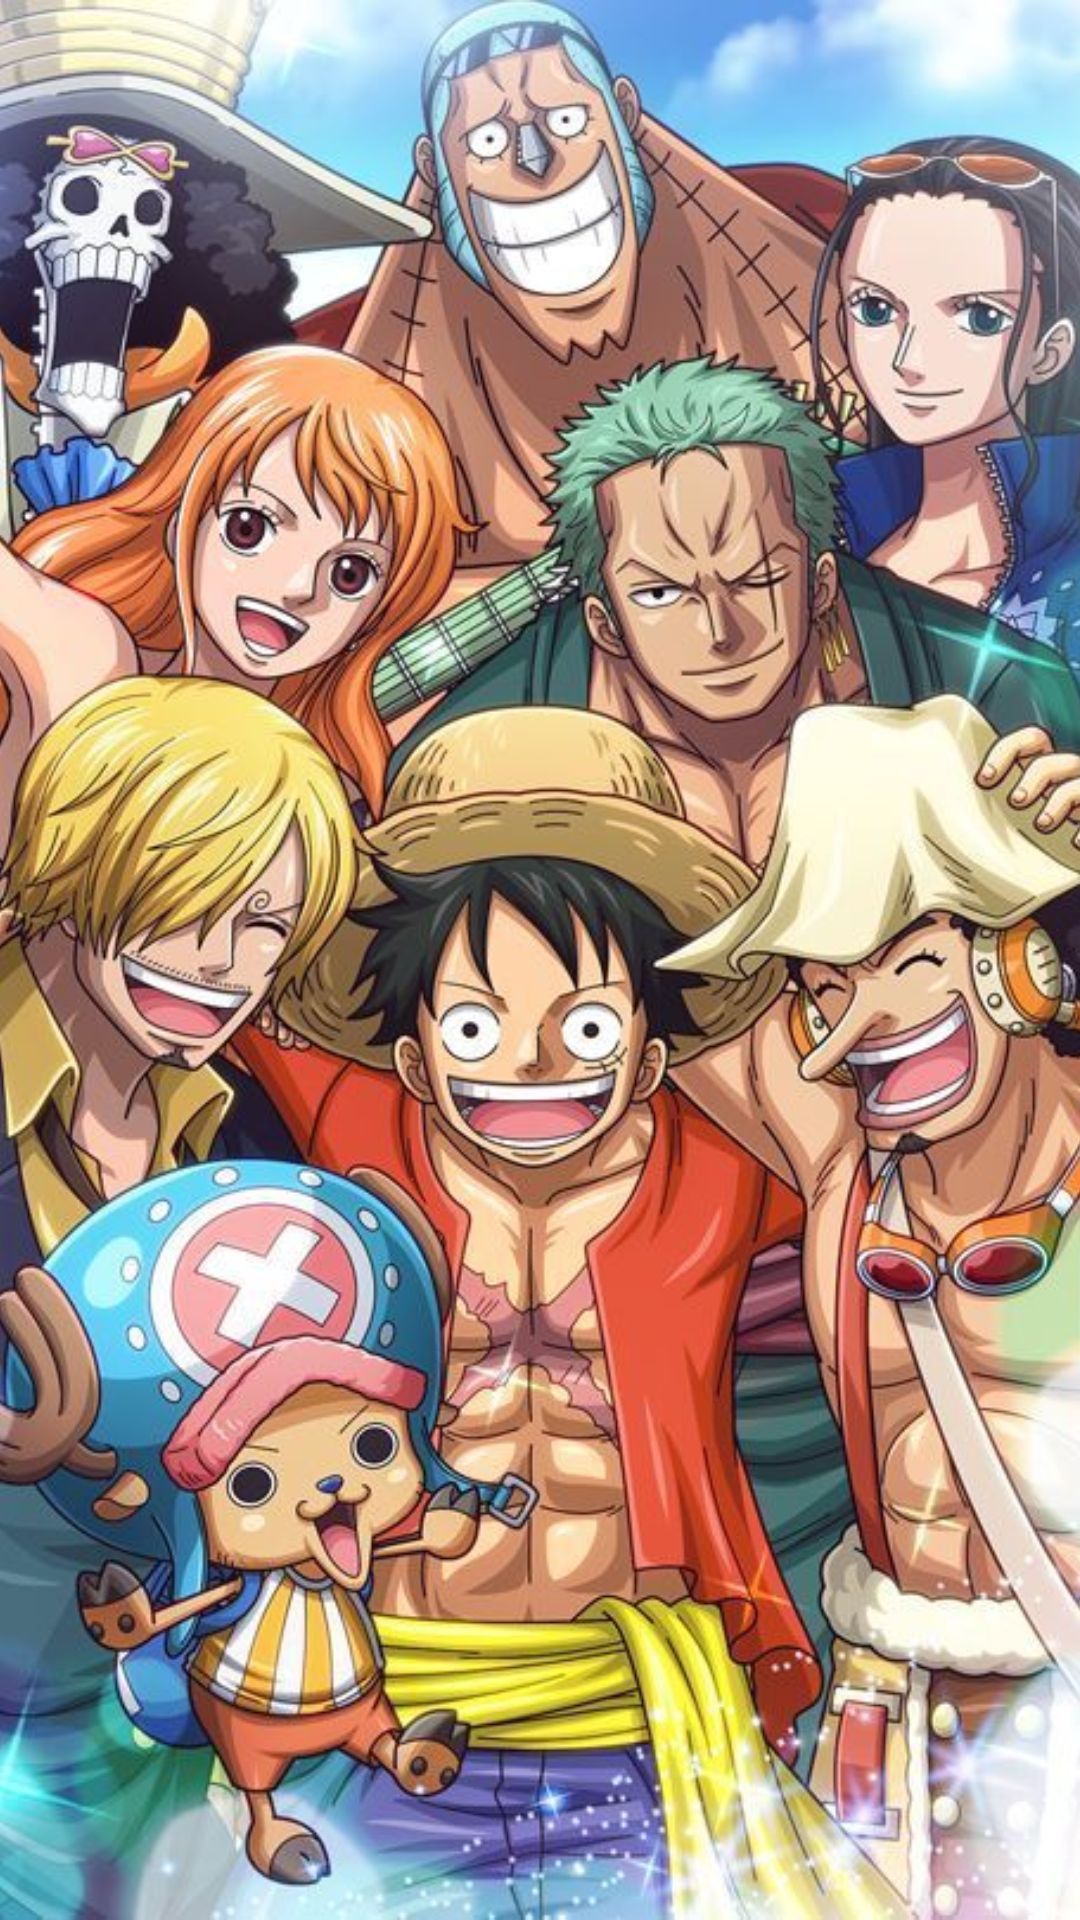 Free download One Piece HD Wallpaper Top Ultra HD One Piece Background Download [1080x1920] for your Desktop, Mobile & Tablet. Explore One Piece Anime iPhone Wallpaper. One Piece Anime